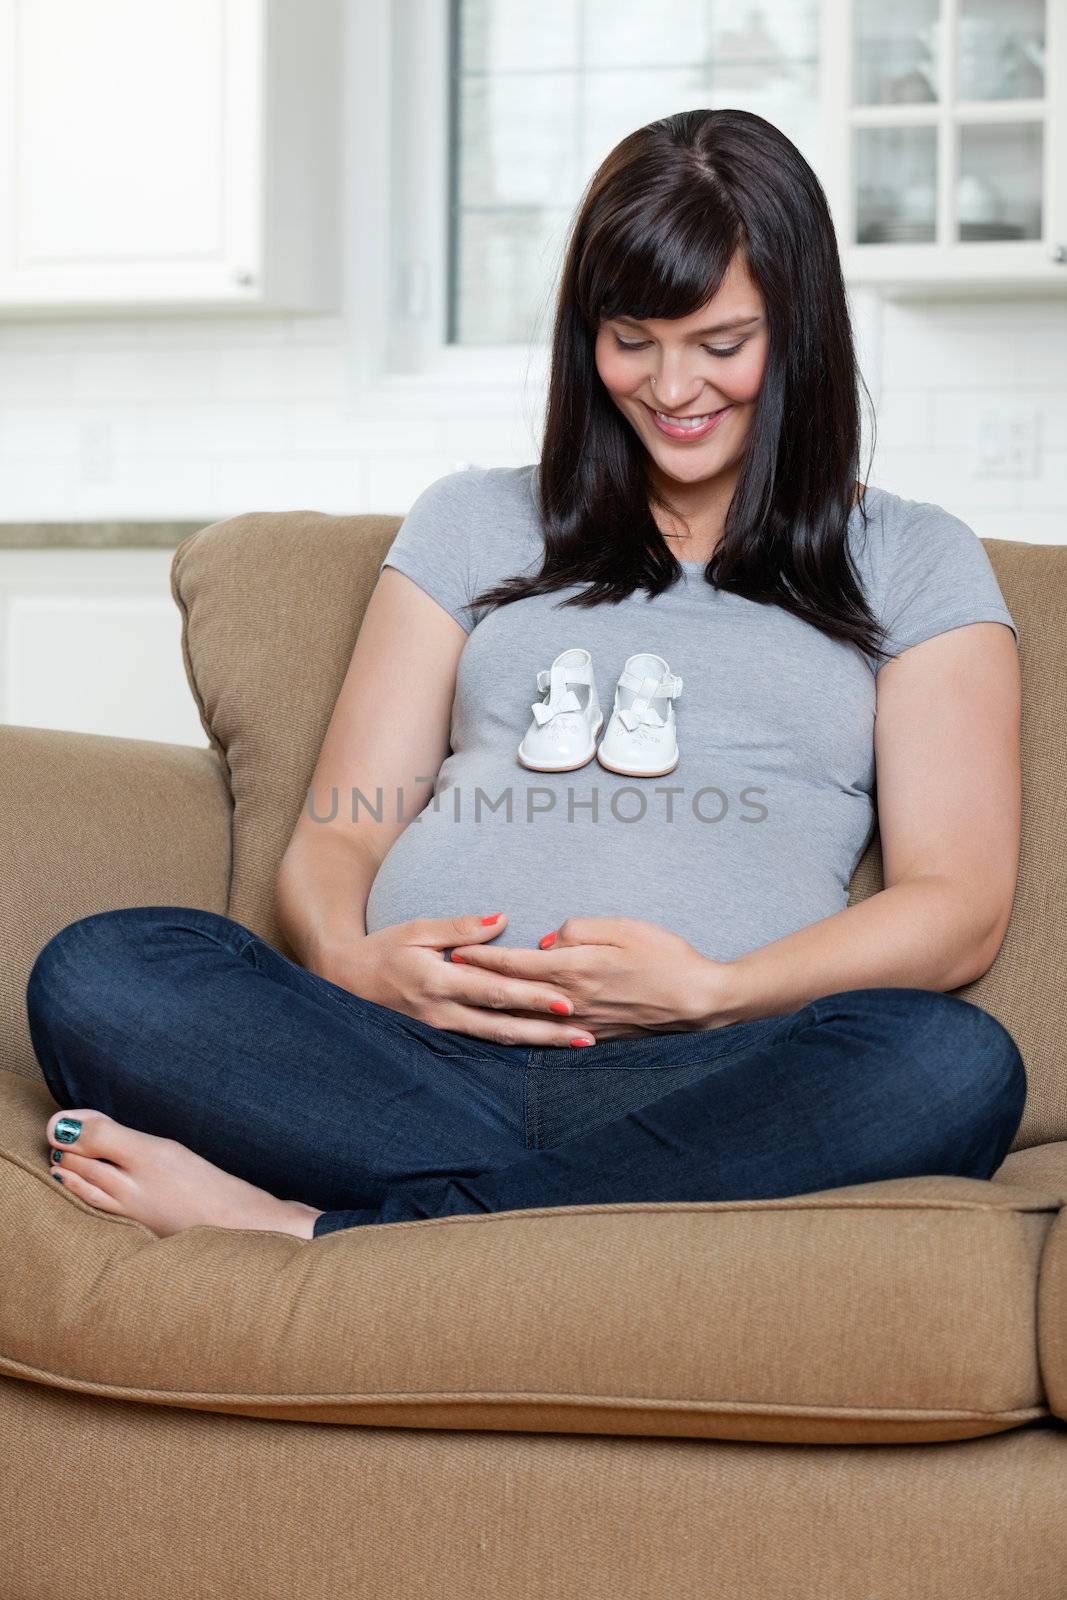 Pregnant Woman Looking At Baby Shoes On Her Belly by leaf